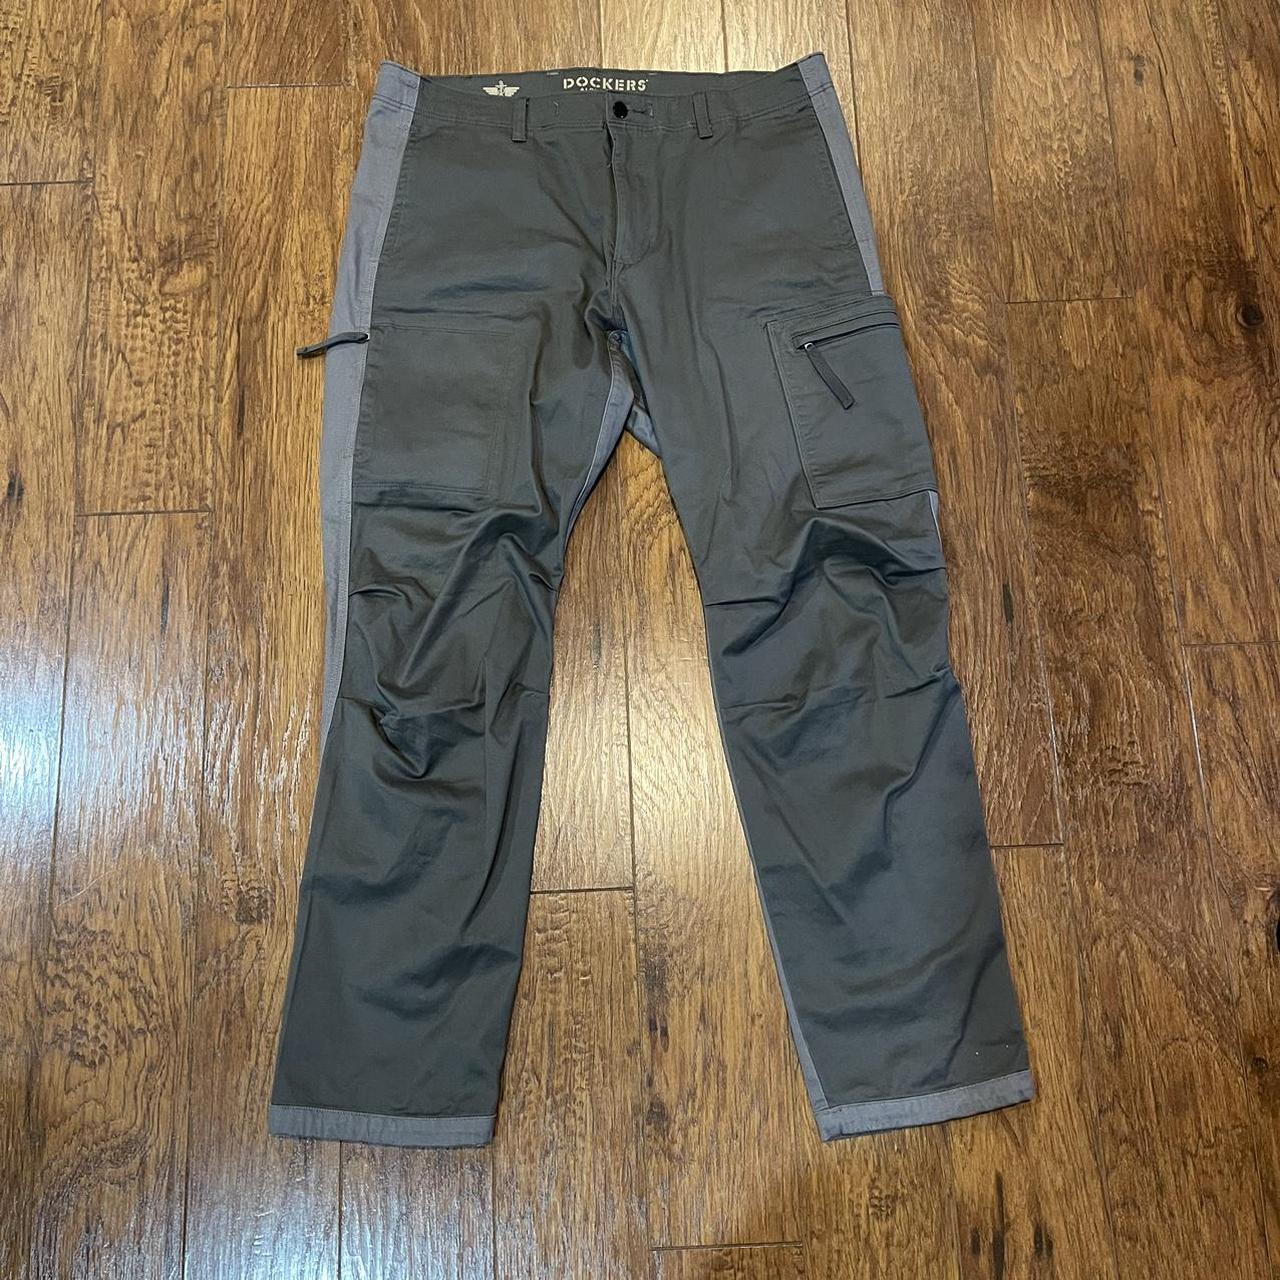 Dockers Men's Silver and Grey Trousers | Depop